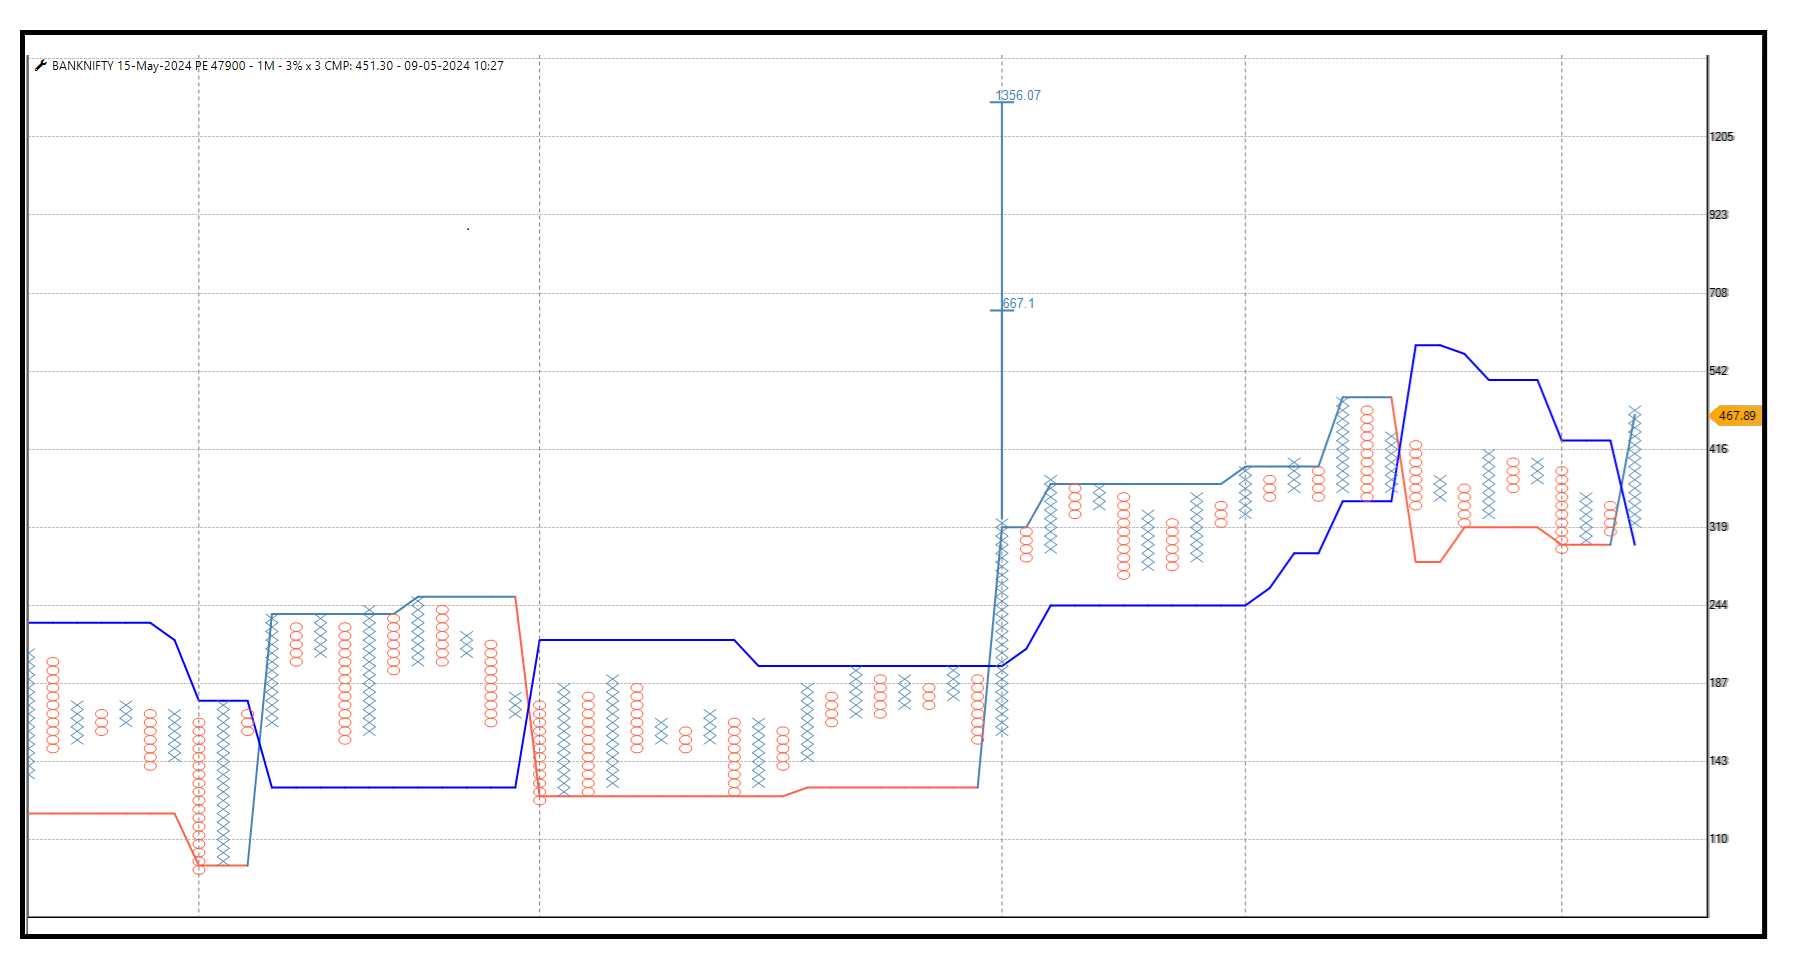 0905-Banknifty 4790 PE.png